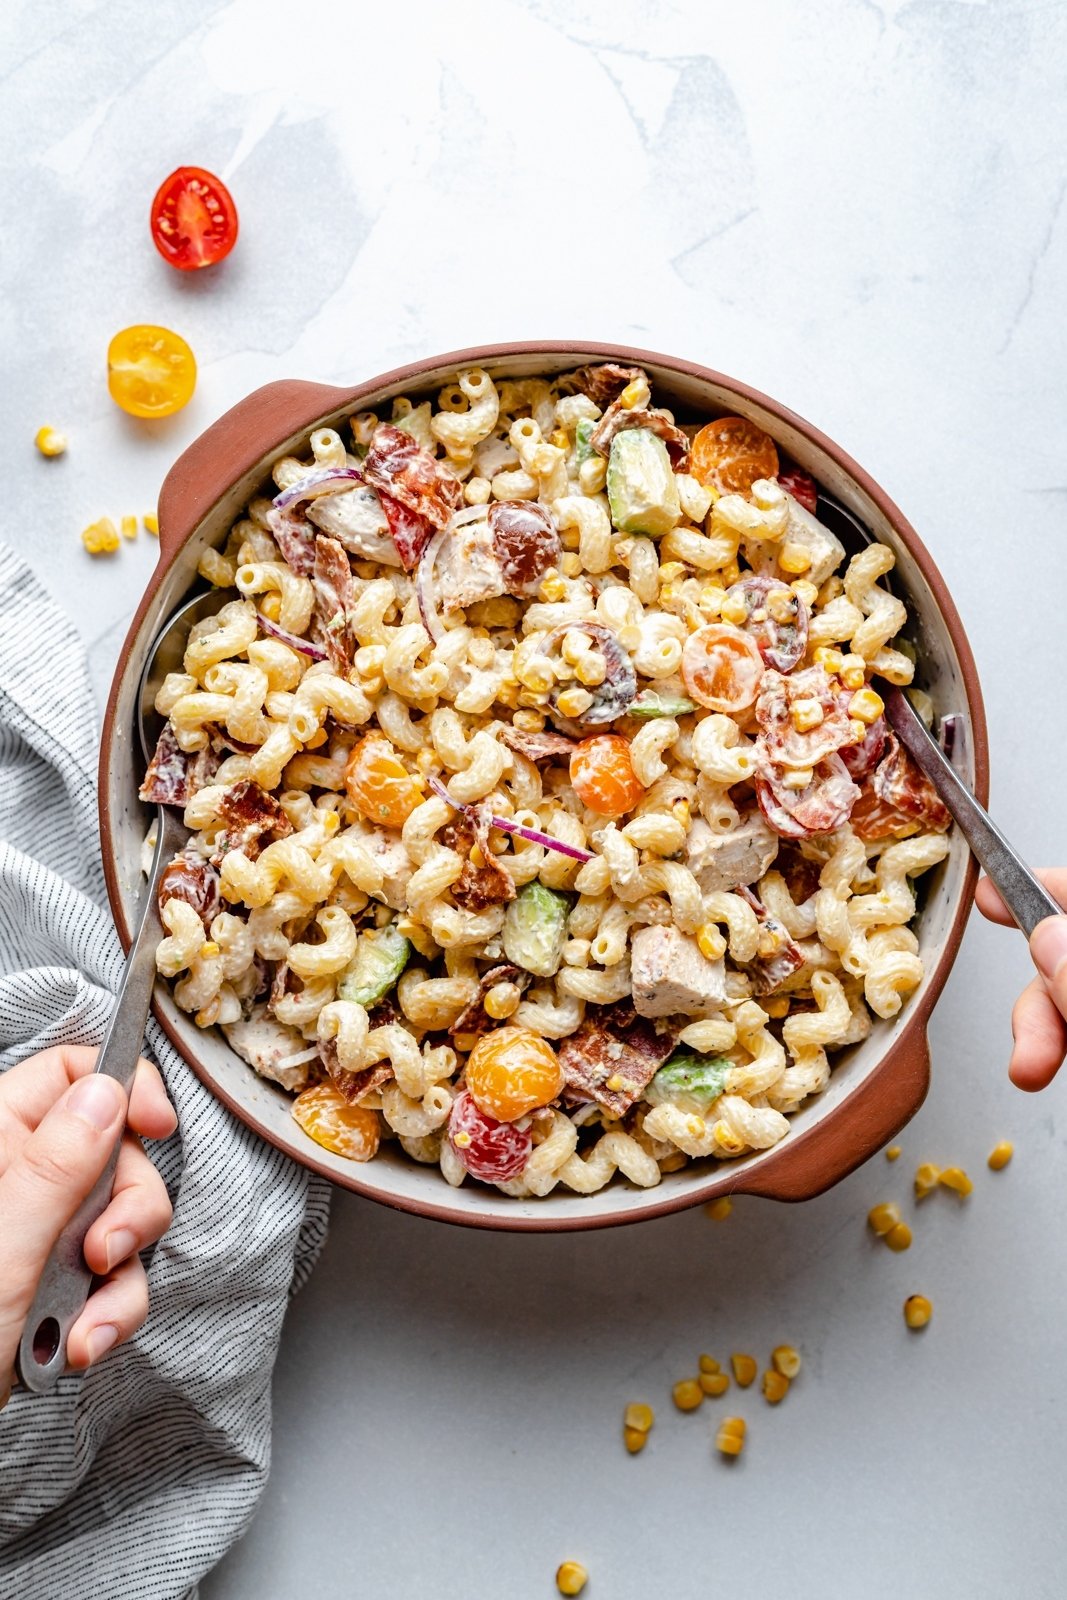 spooning up chicken and bacon pasta salad from a bowl